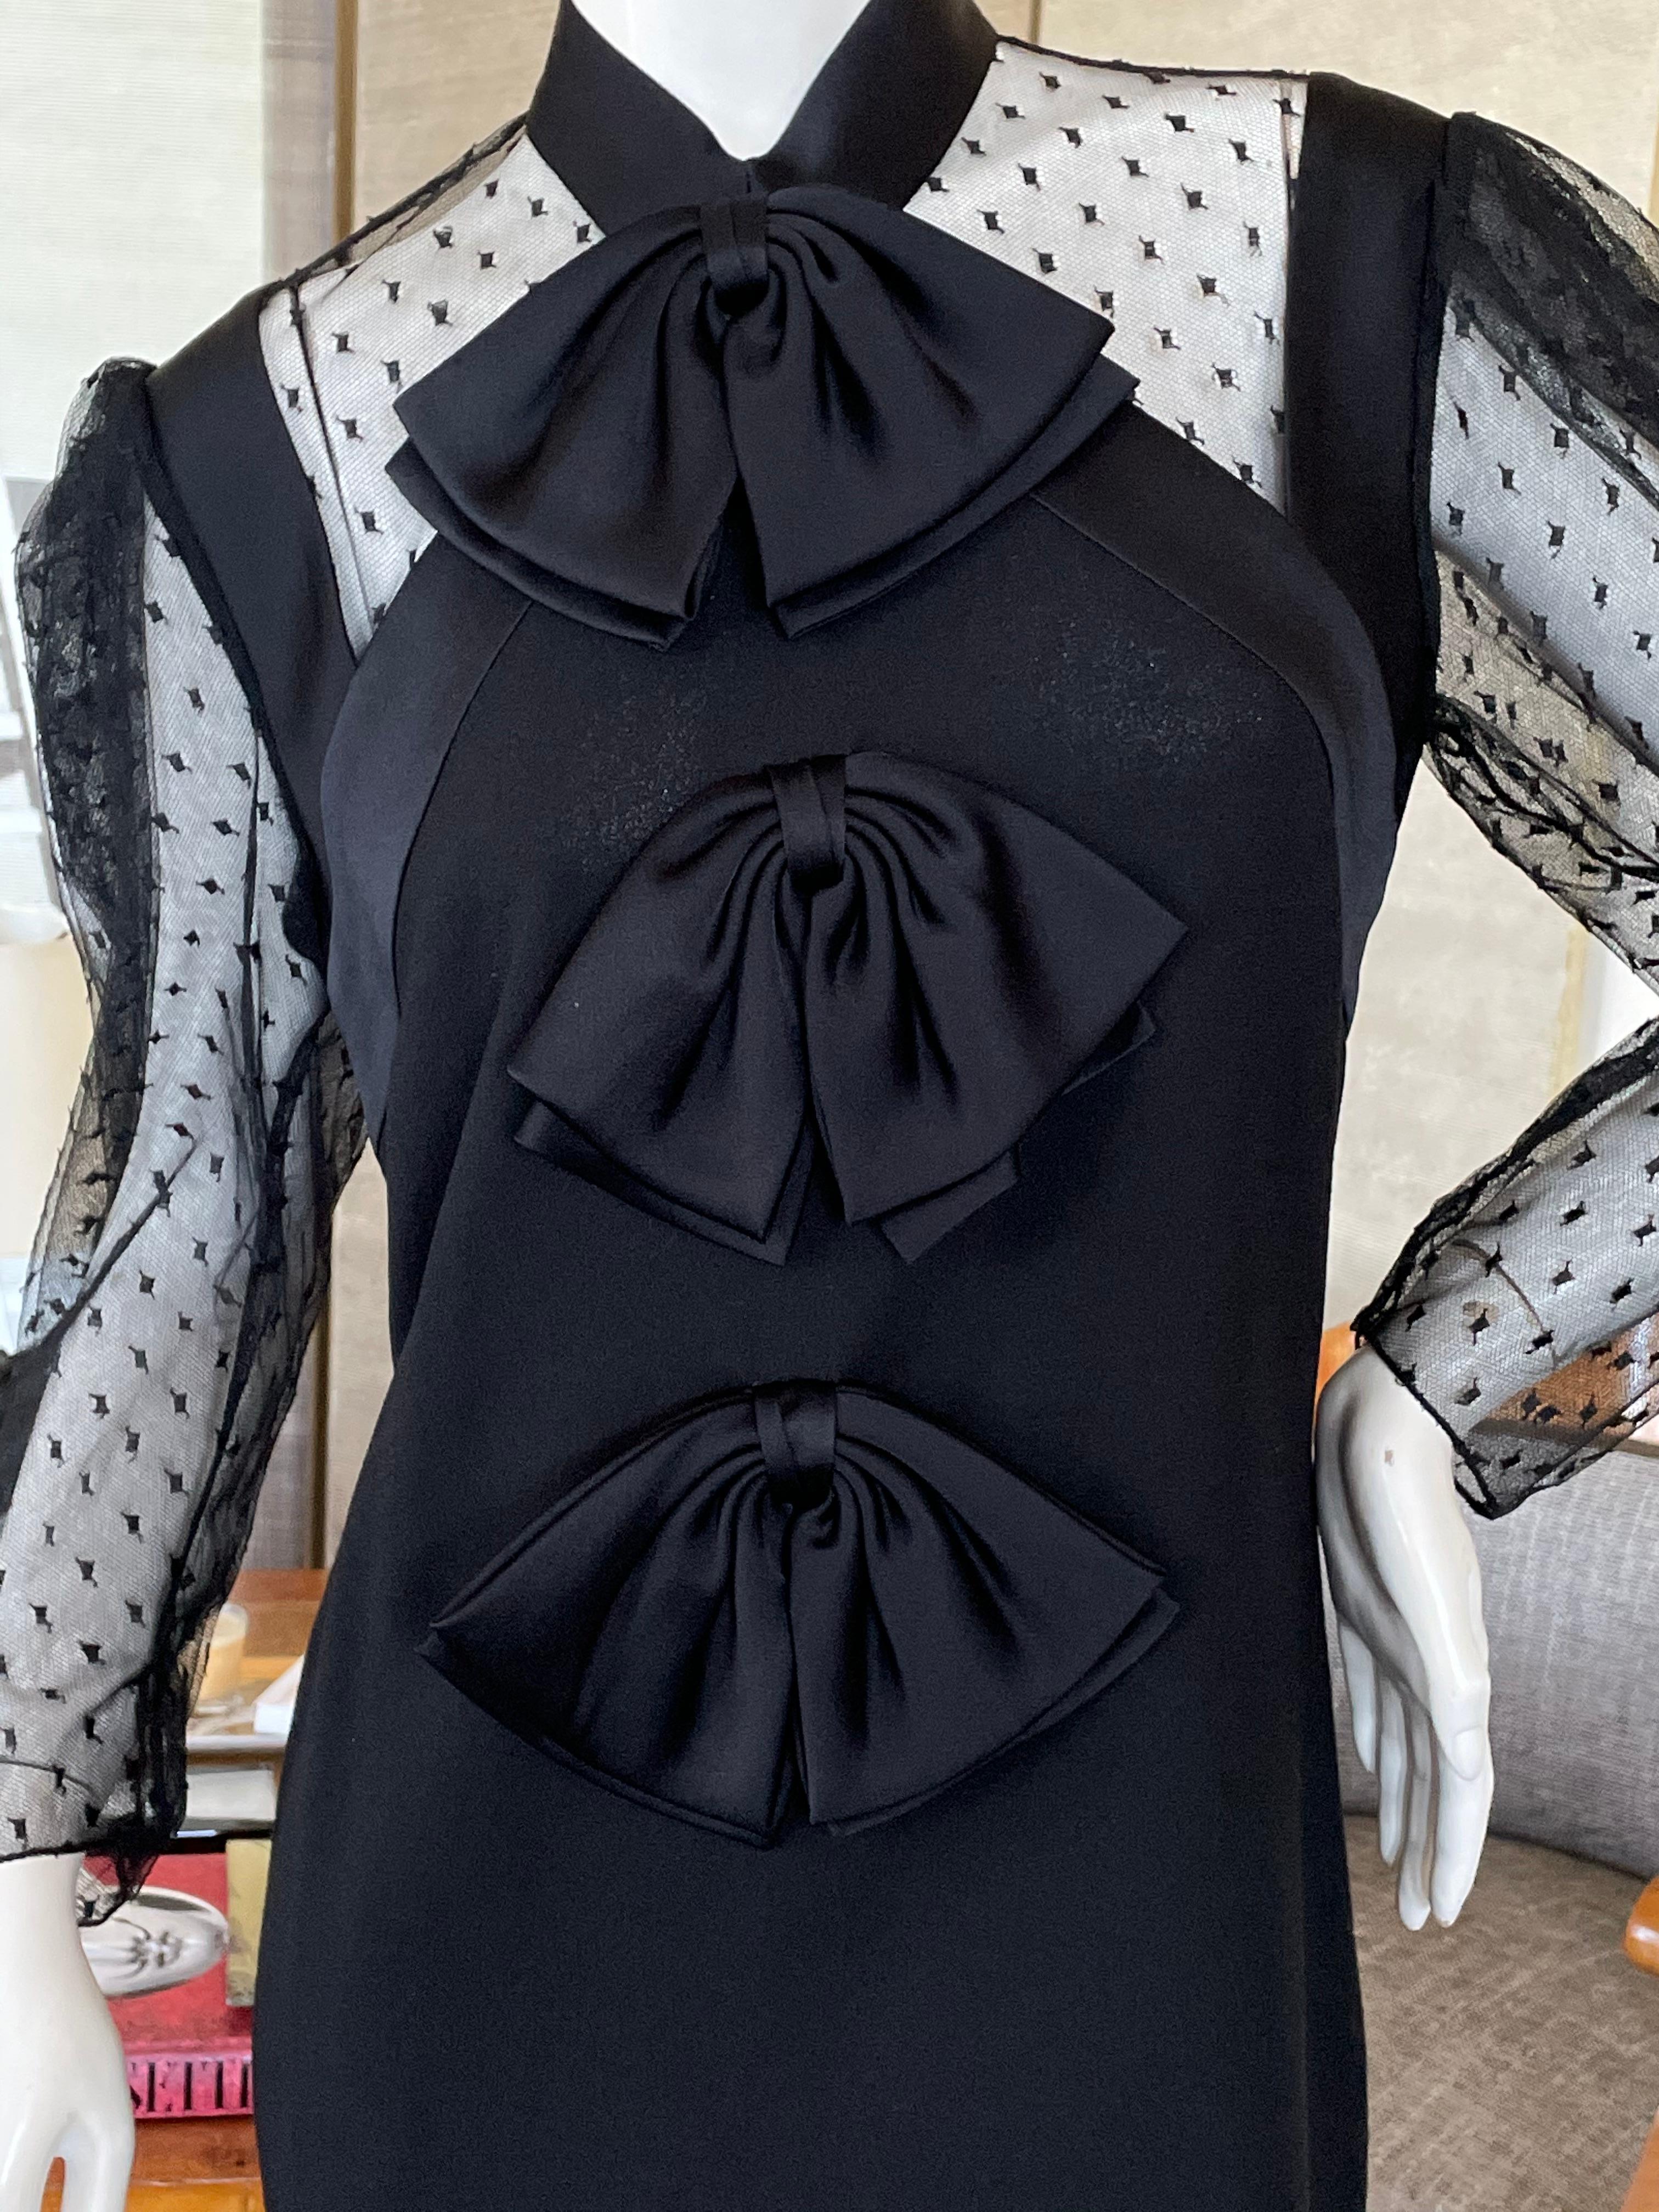 Women's Givenchy Sheer Dot Dress w Bows by Clare Waight Keller New from Bergdorf Goodman